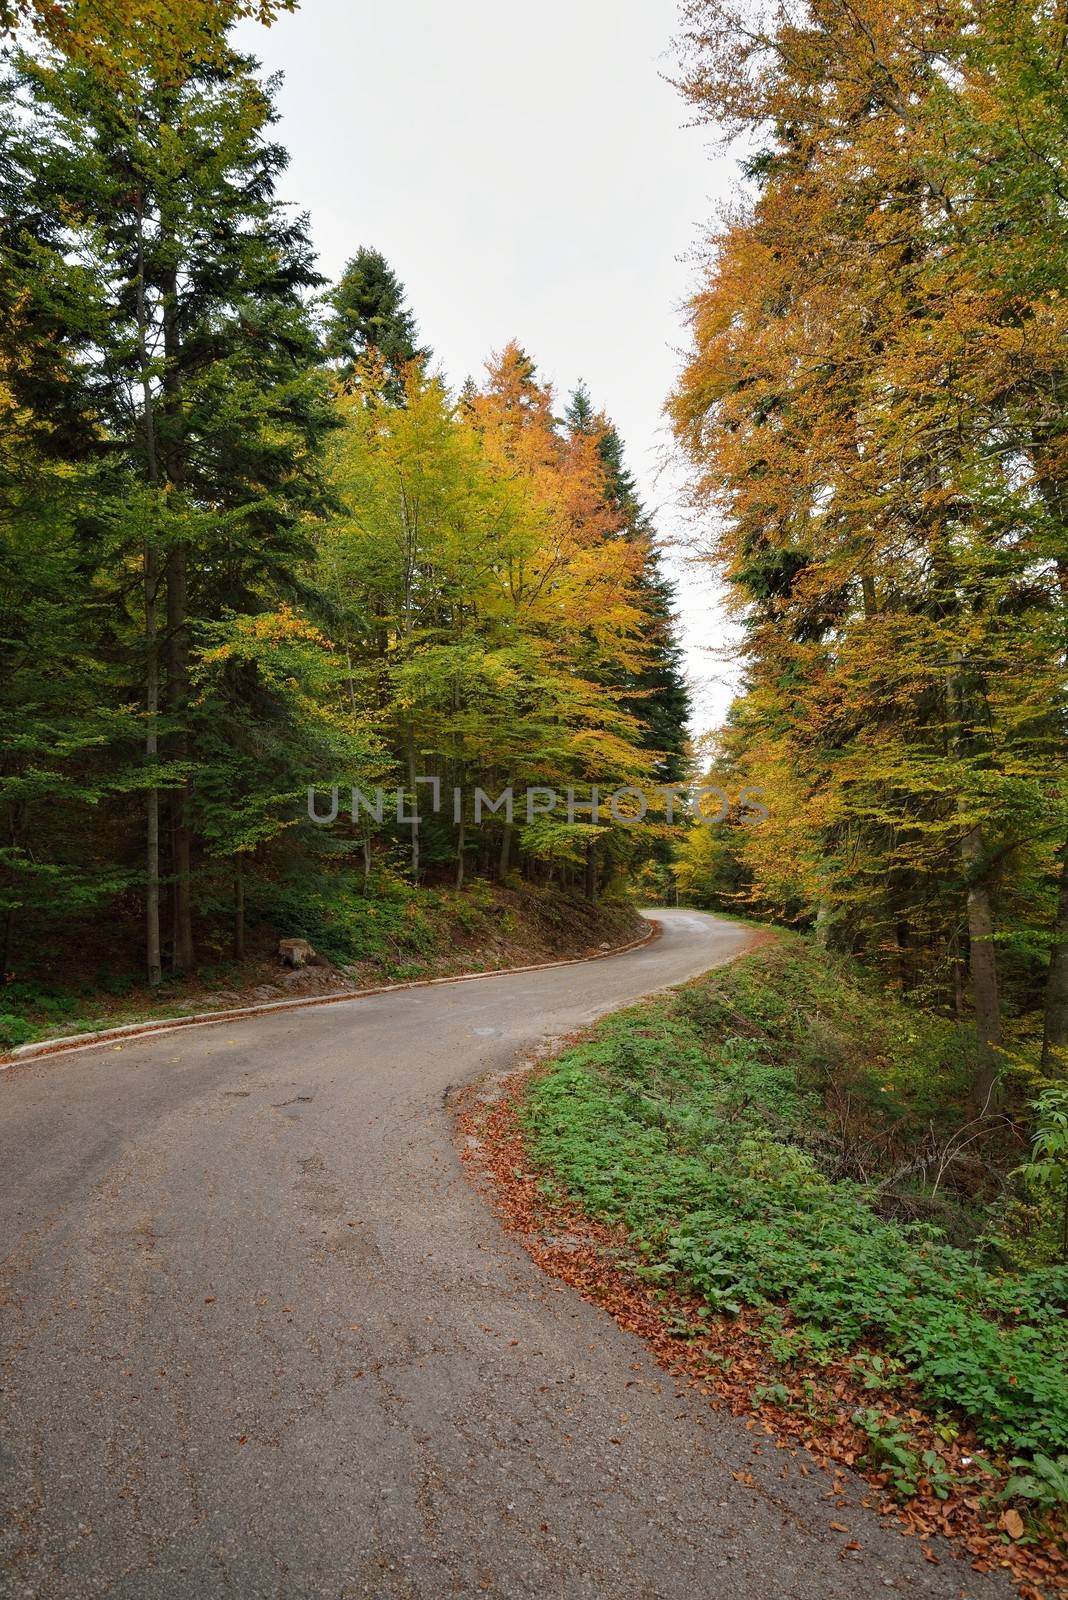 Road in Autumn Forest by zagart36